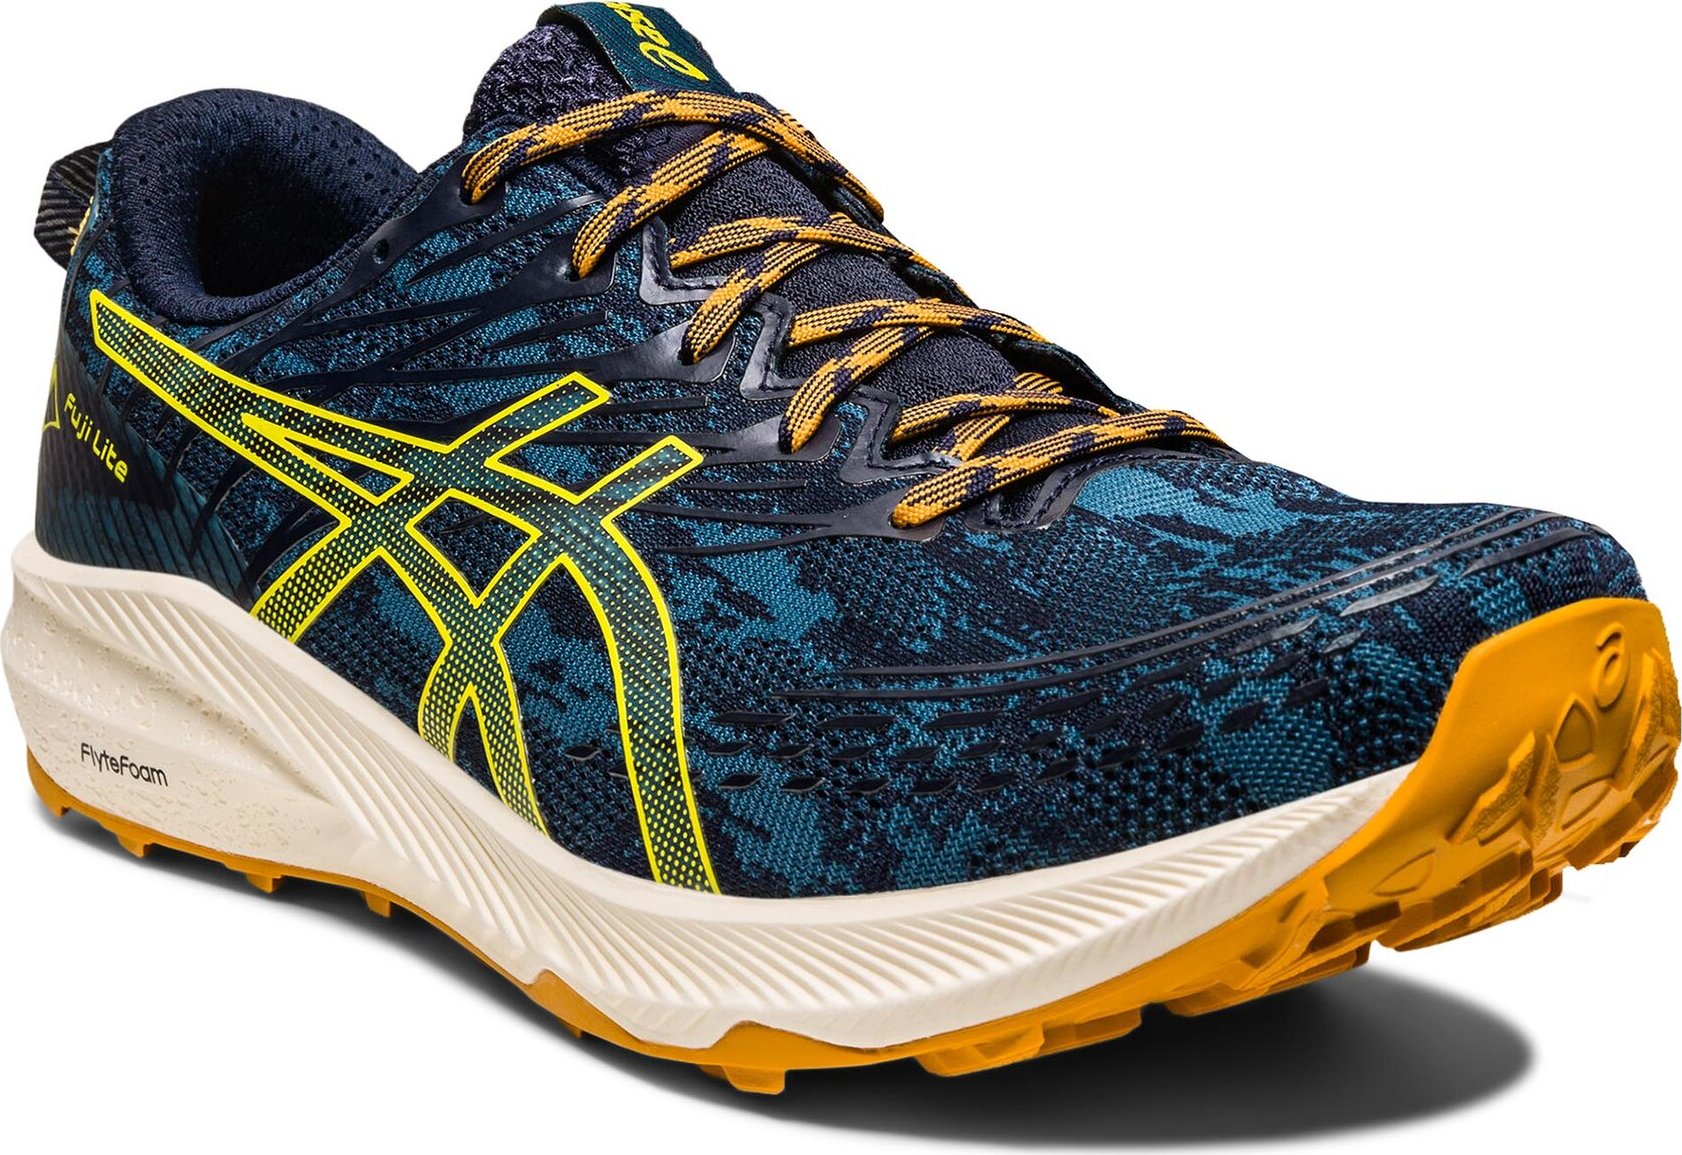 Topánky Asics Fuji Lite 3 1011B467 Ink Teal/Golden Yellow 401